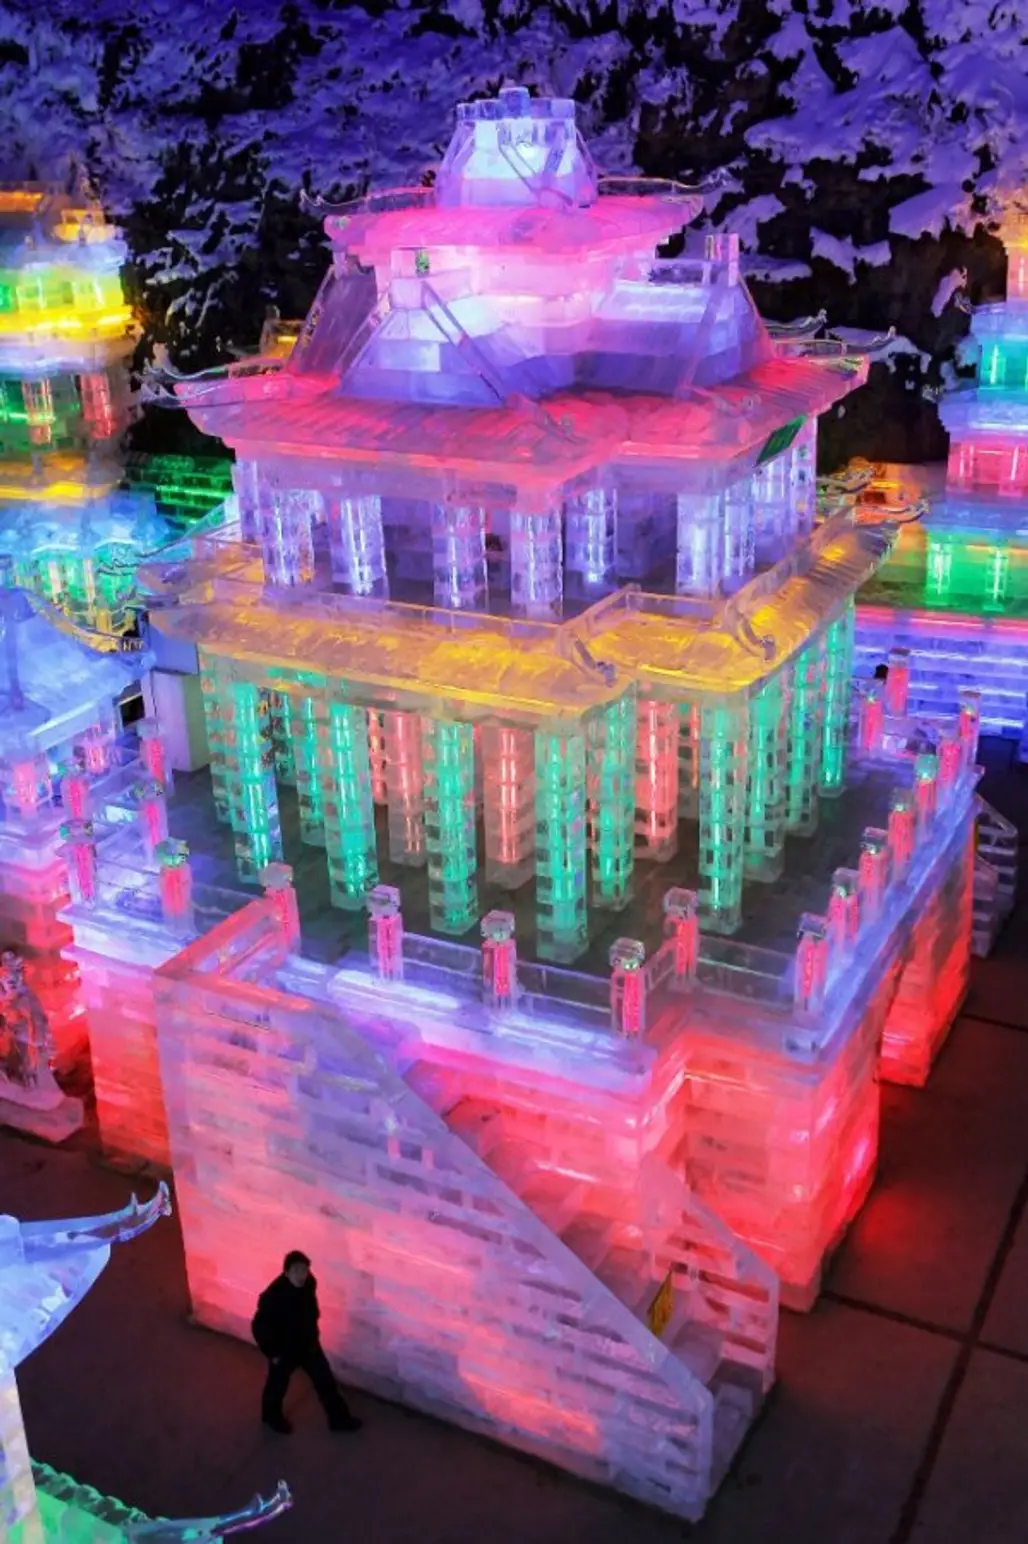 Rainbow City Made of Ice at the Yanqing Ice Festival